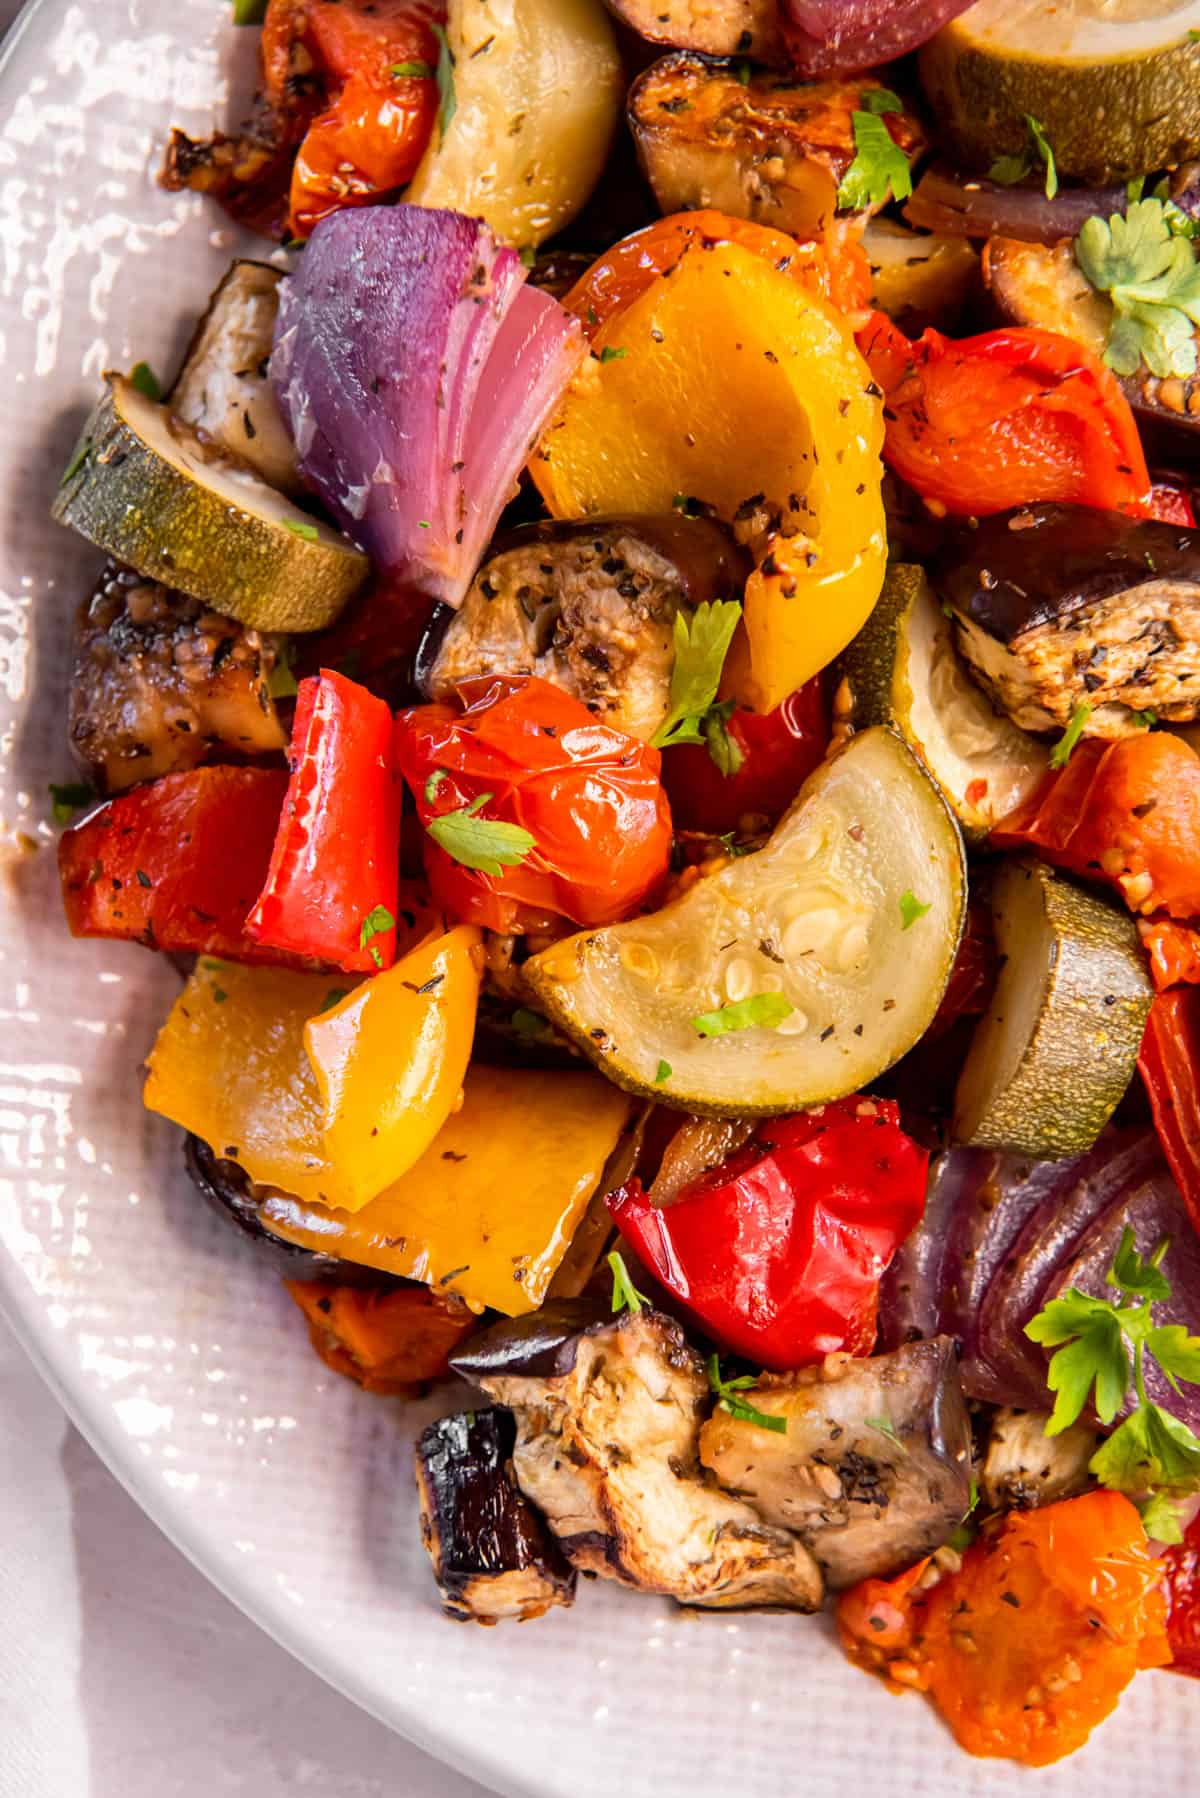 A plate filled with Mediterranean Roasted Vegetables for serving.